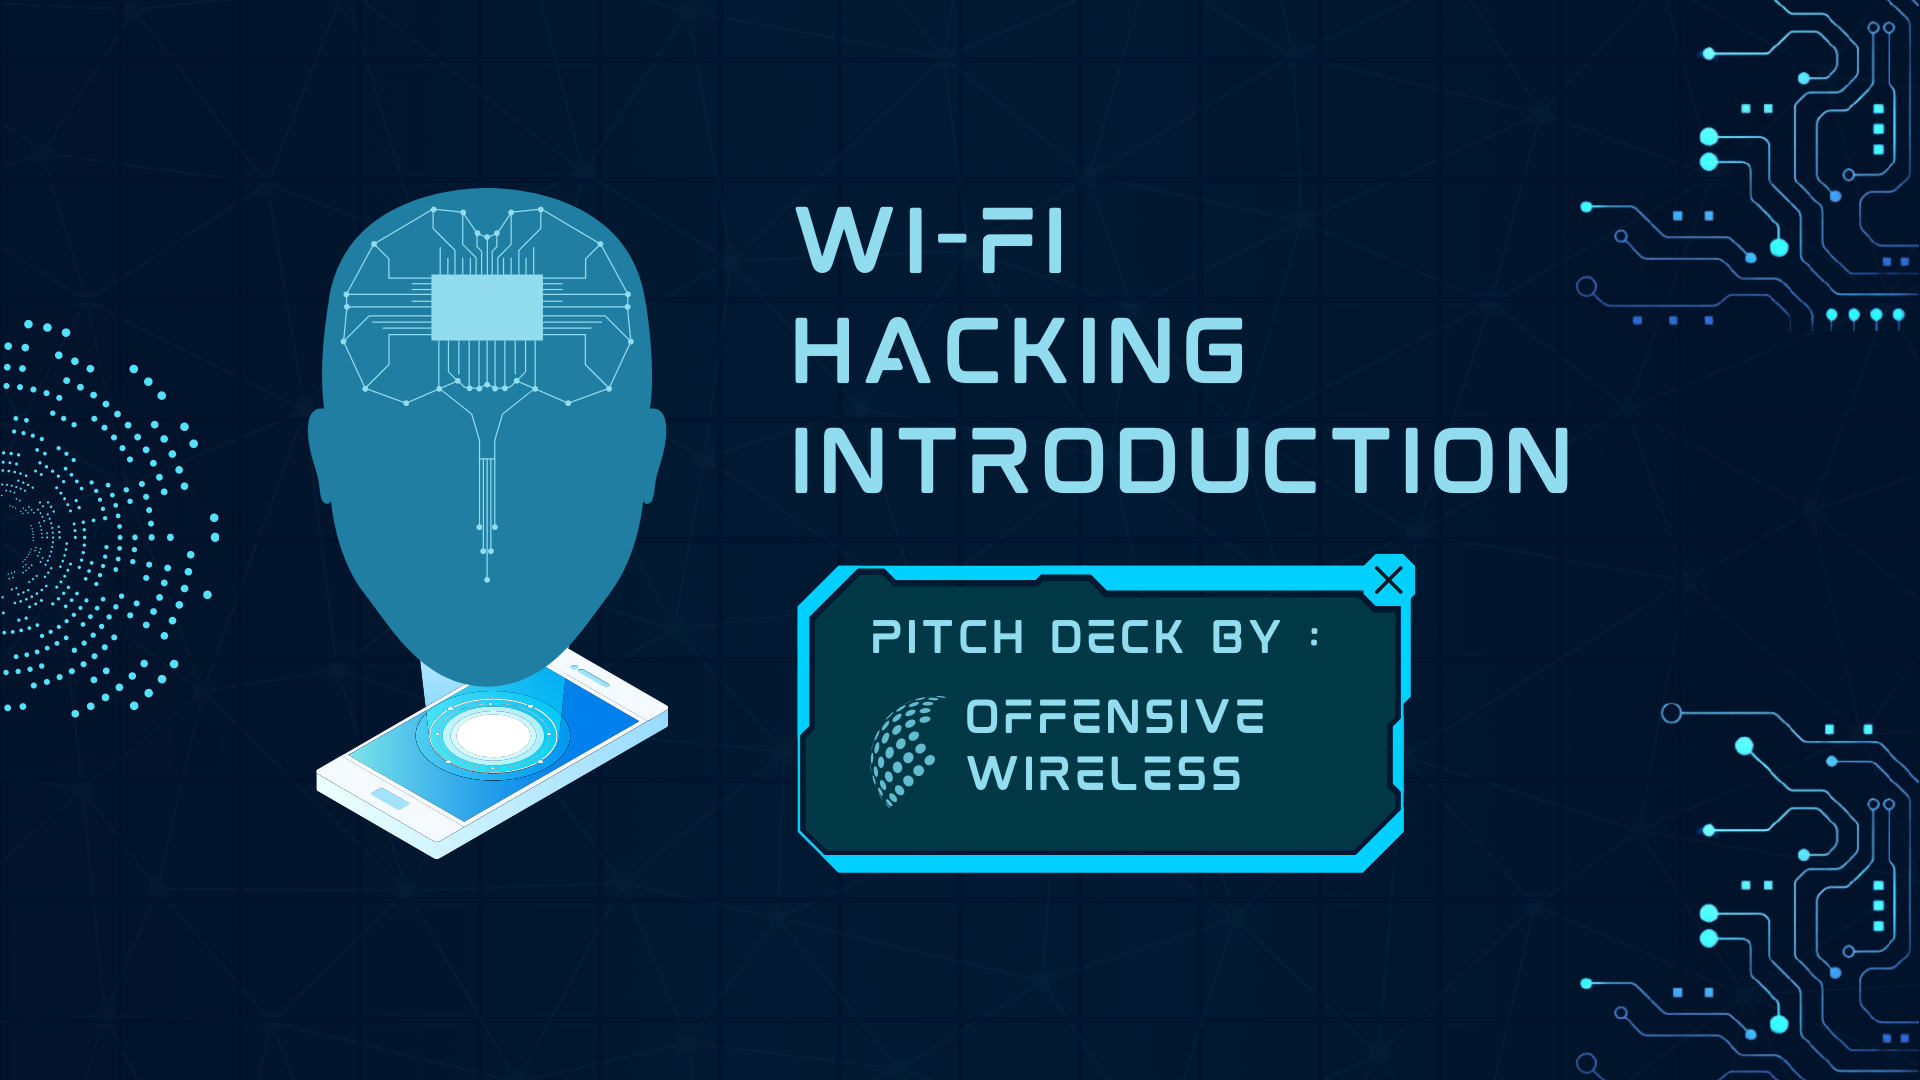 Wi-Fi Hacking Introduction